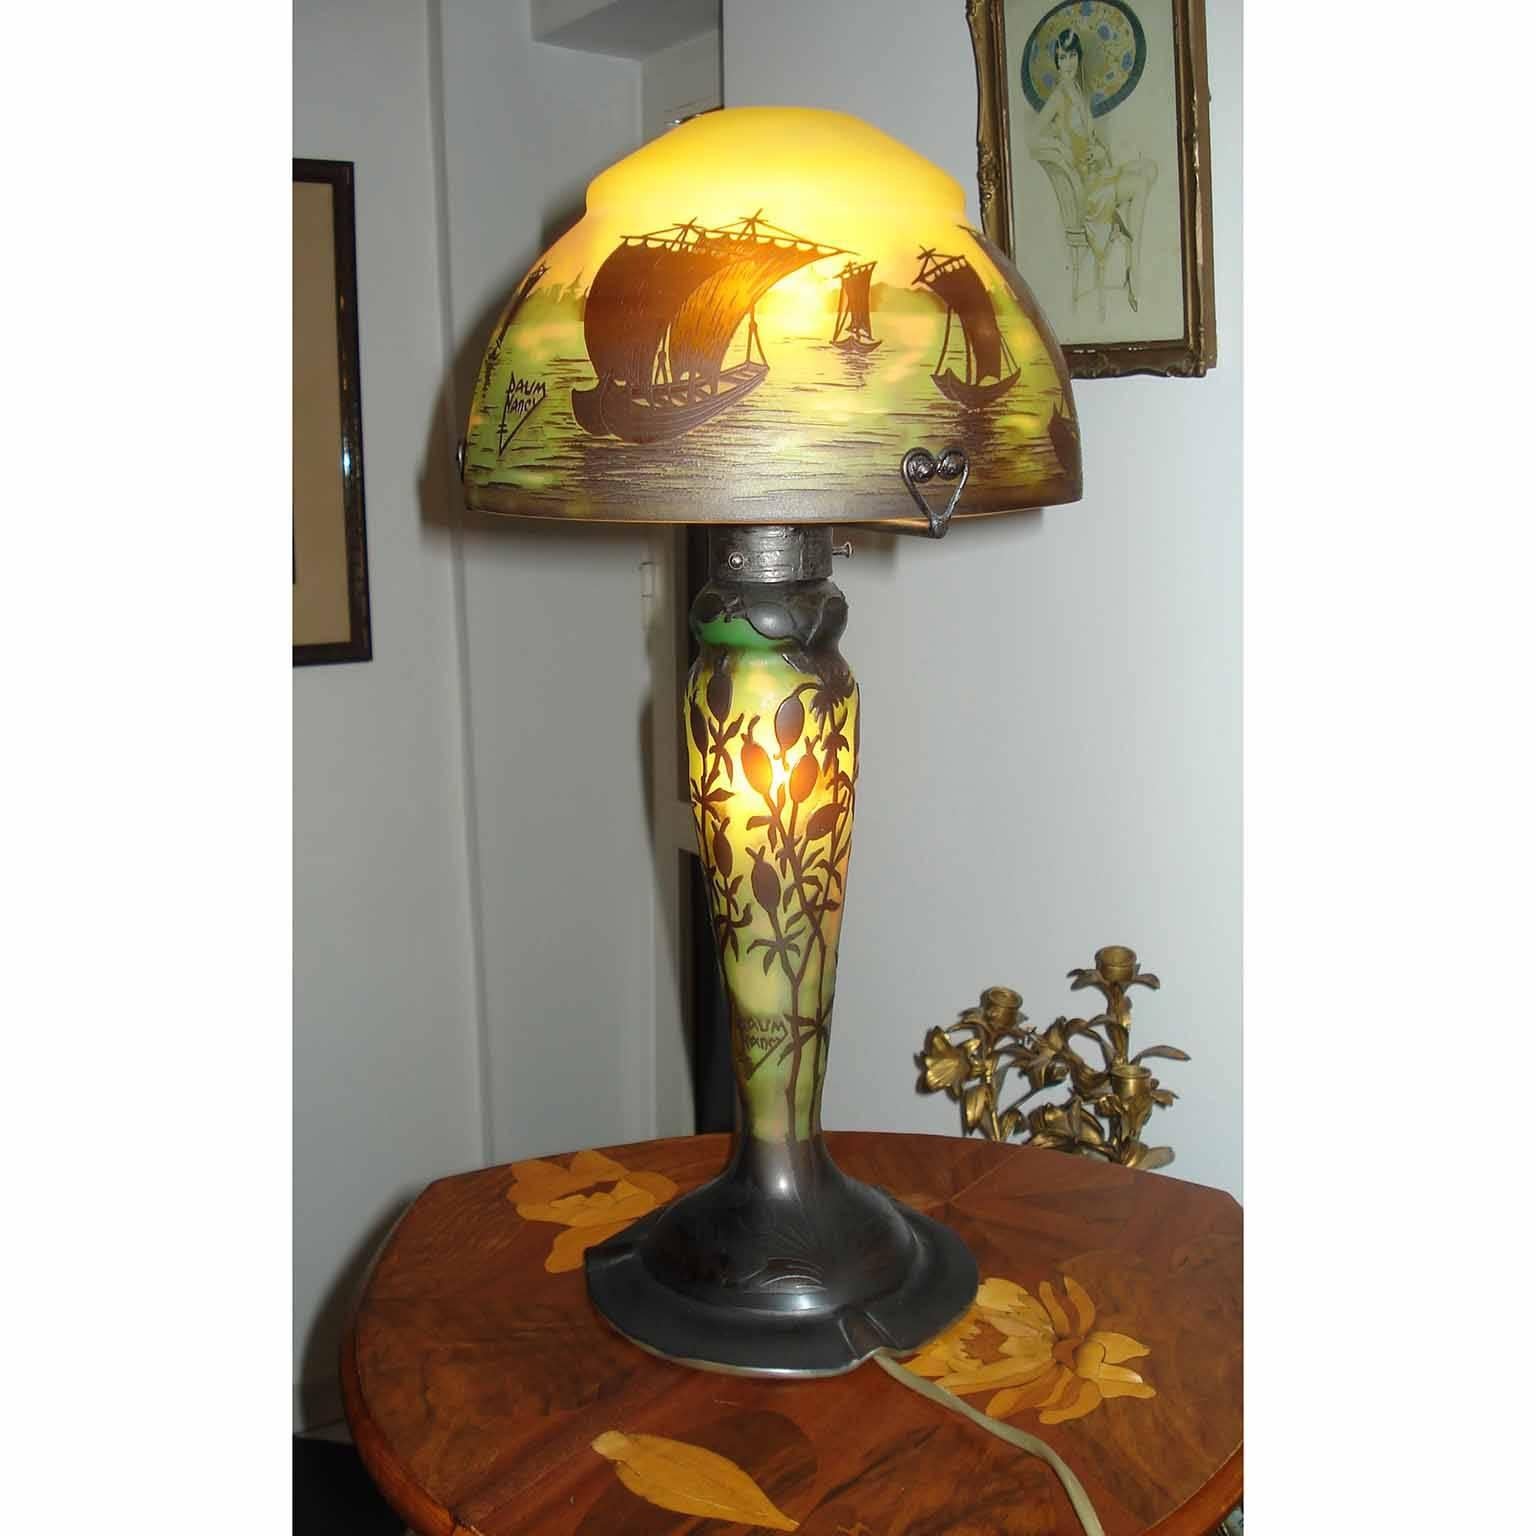 French Art Nouveau Daum Nancy cameo glass table lamp with boats landscape decor. Cameo signature on shade and on the foot.

Dimensions: 
Height 47 cm (18.5 in.), Shade diameter 23 cm (9.06 in.)

Excellent condition.